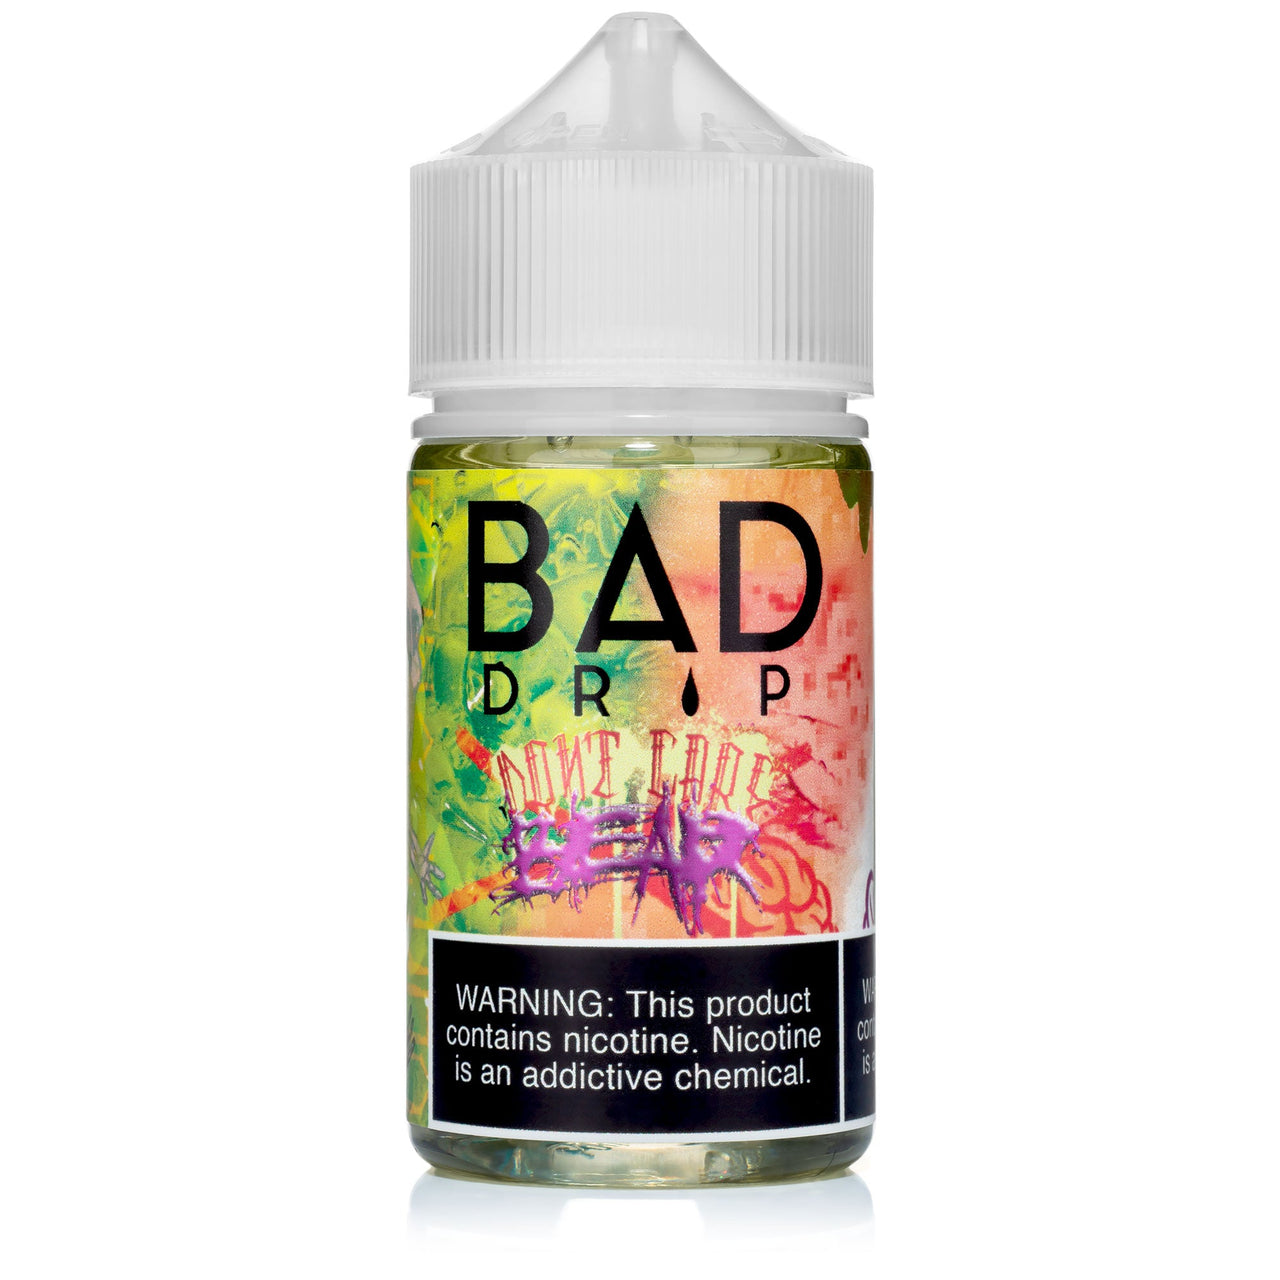 BAD DRIP EJUICE - DON'T CARE BEAR - 60ML - EJUICEOVERSTOCK.COM